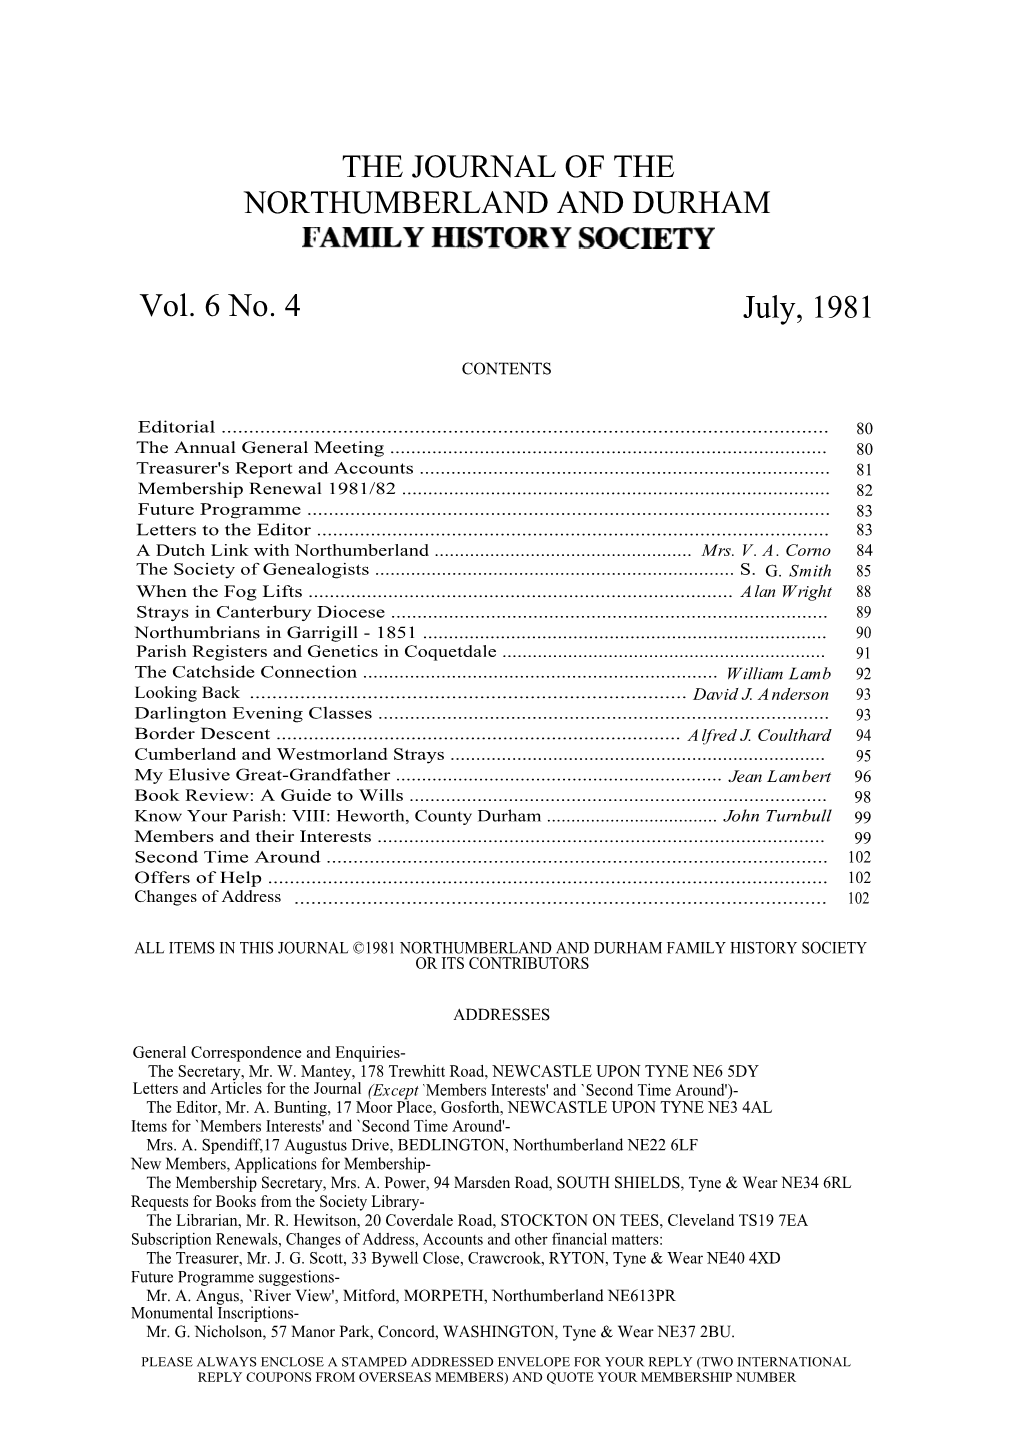 The Journal of the Northumberland and Durham Family History Society